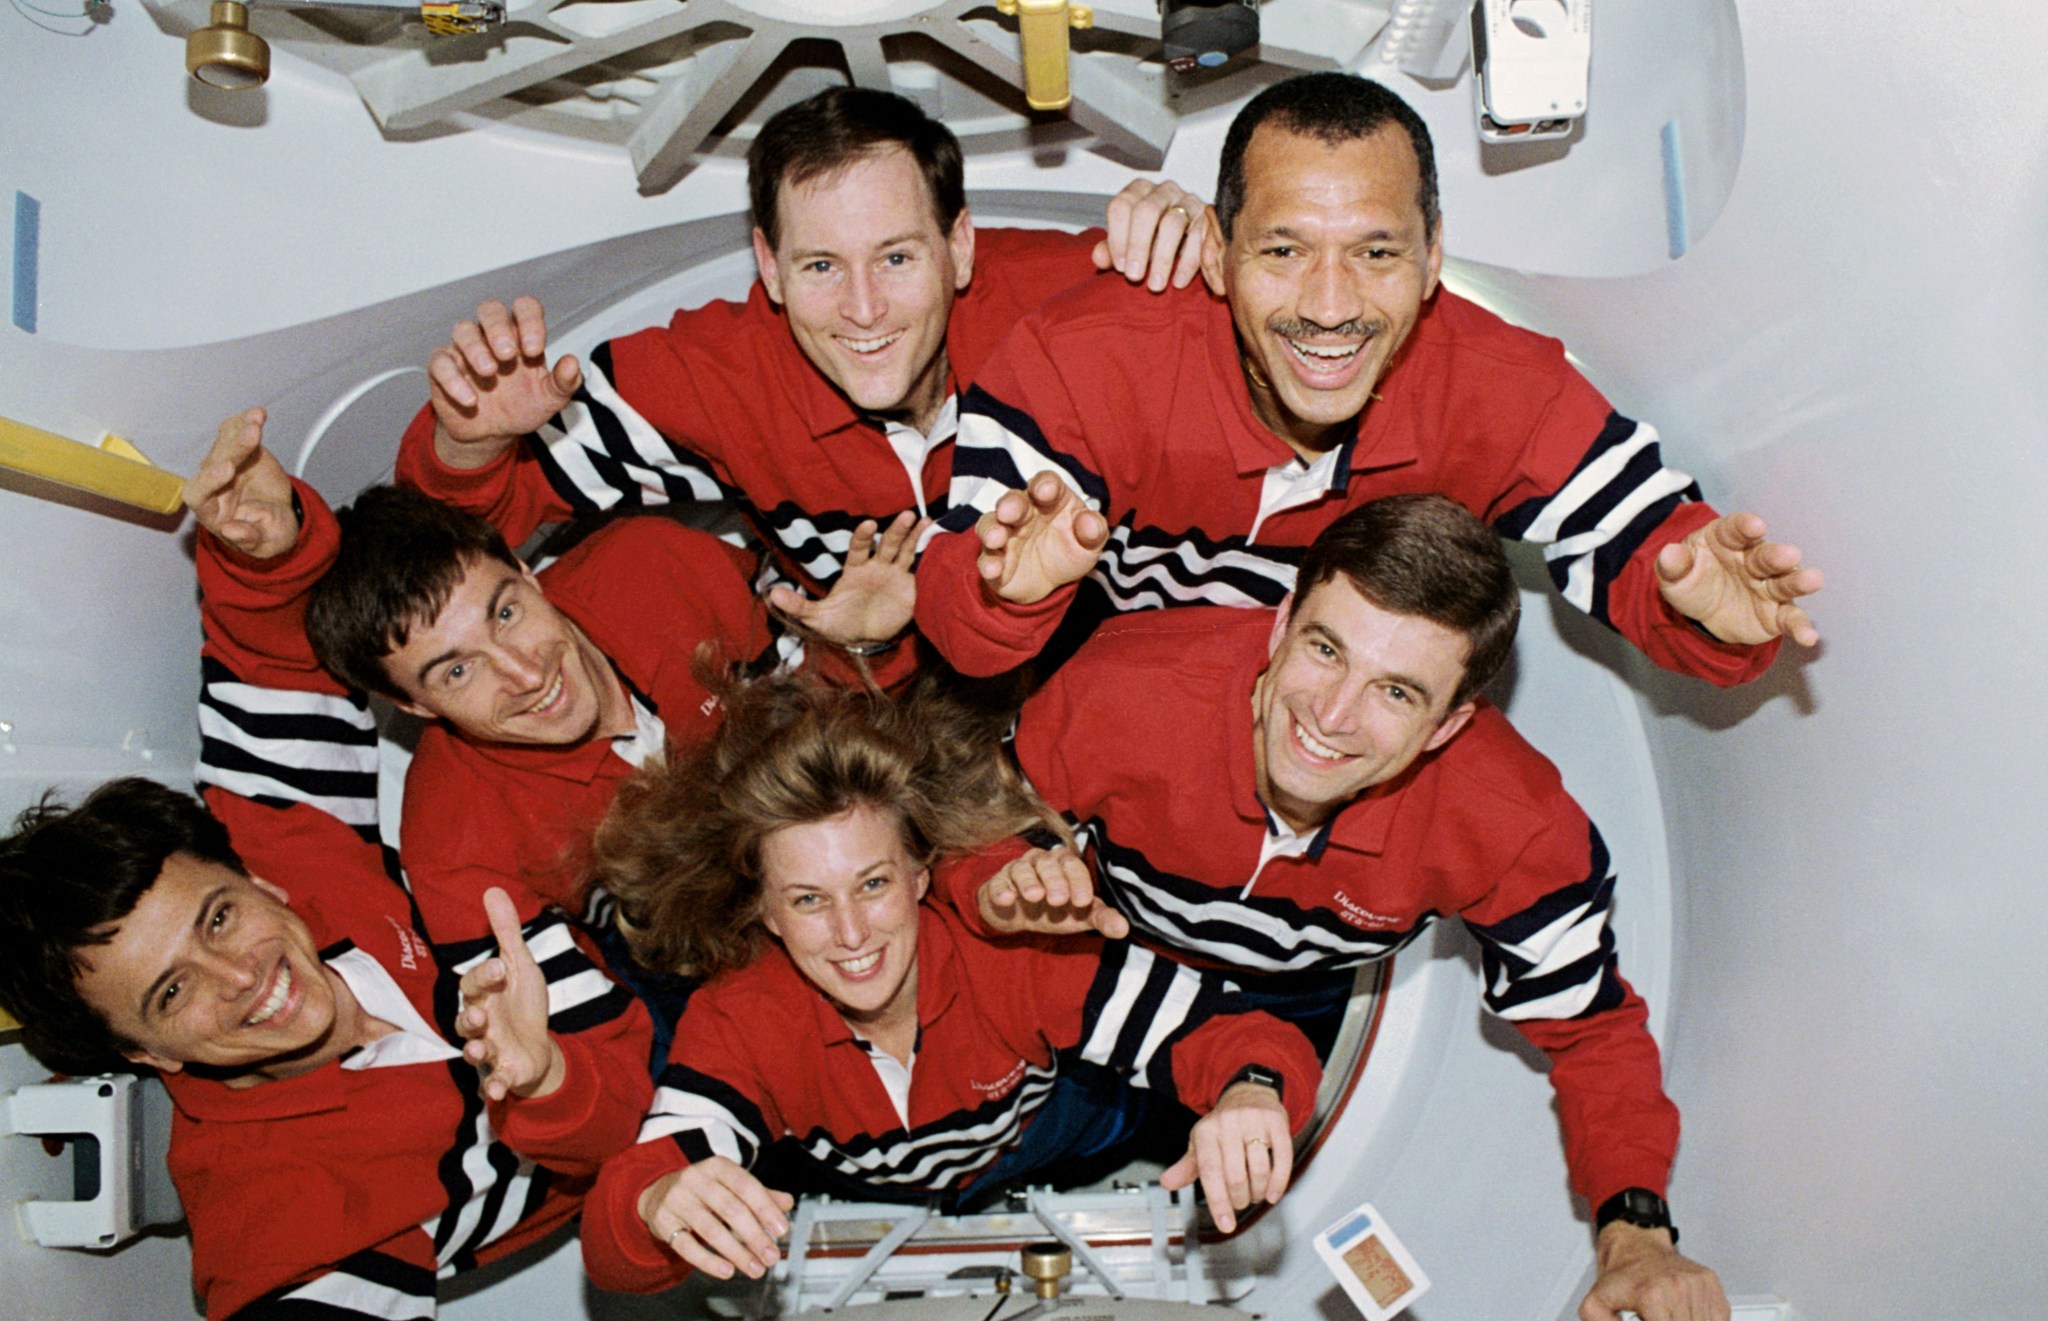 Five NASA astronauts and a Russian cosmonaut squeeze through the tunnel which connects the shirt-sleeve environment of the Space Shuttle Discovery and the SPACEHAB module. SPACEHAB is located in the spacecraft's payload bay. Charles F. Bolden Jr., mission commander, is at upper right. Others, clockwise from the commander, are Ronald M. Sega and N. Jan Davis, mission specialists; Franklin R. Chang-Diaz, payload commander; Cosmonaut Sergei K. Krikalev, mission specialist; and Kenneth S. Reightler Jr., pilot.